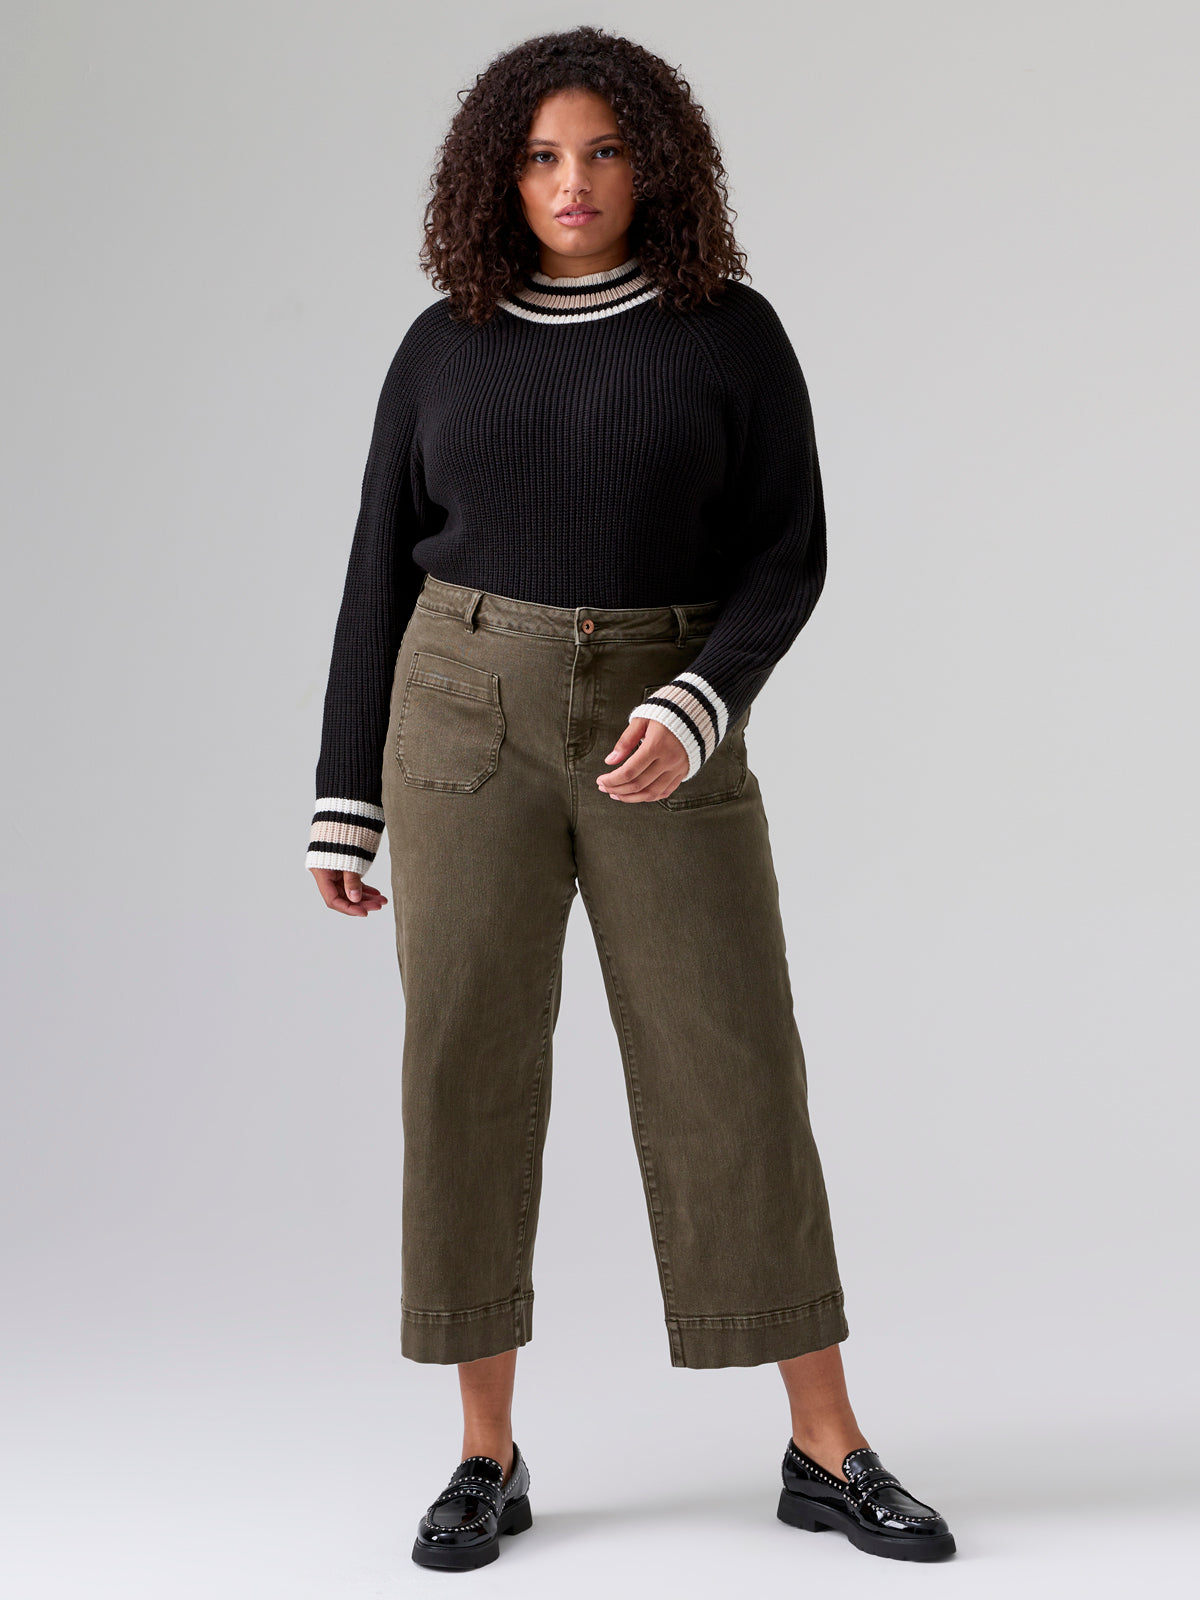 The Marine Standard Rise Crop Trouser Pant Fatigue Inclusive Collection